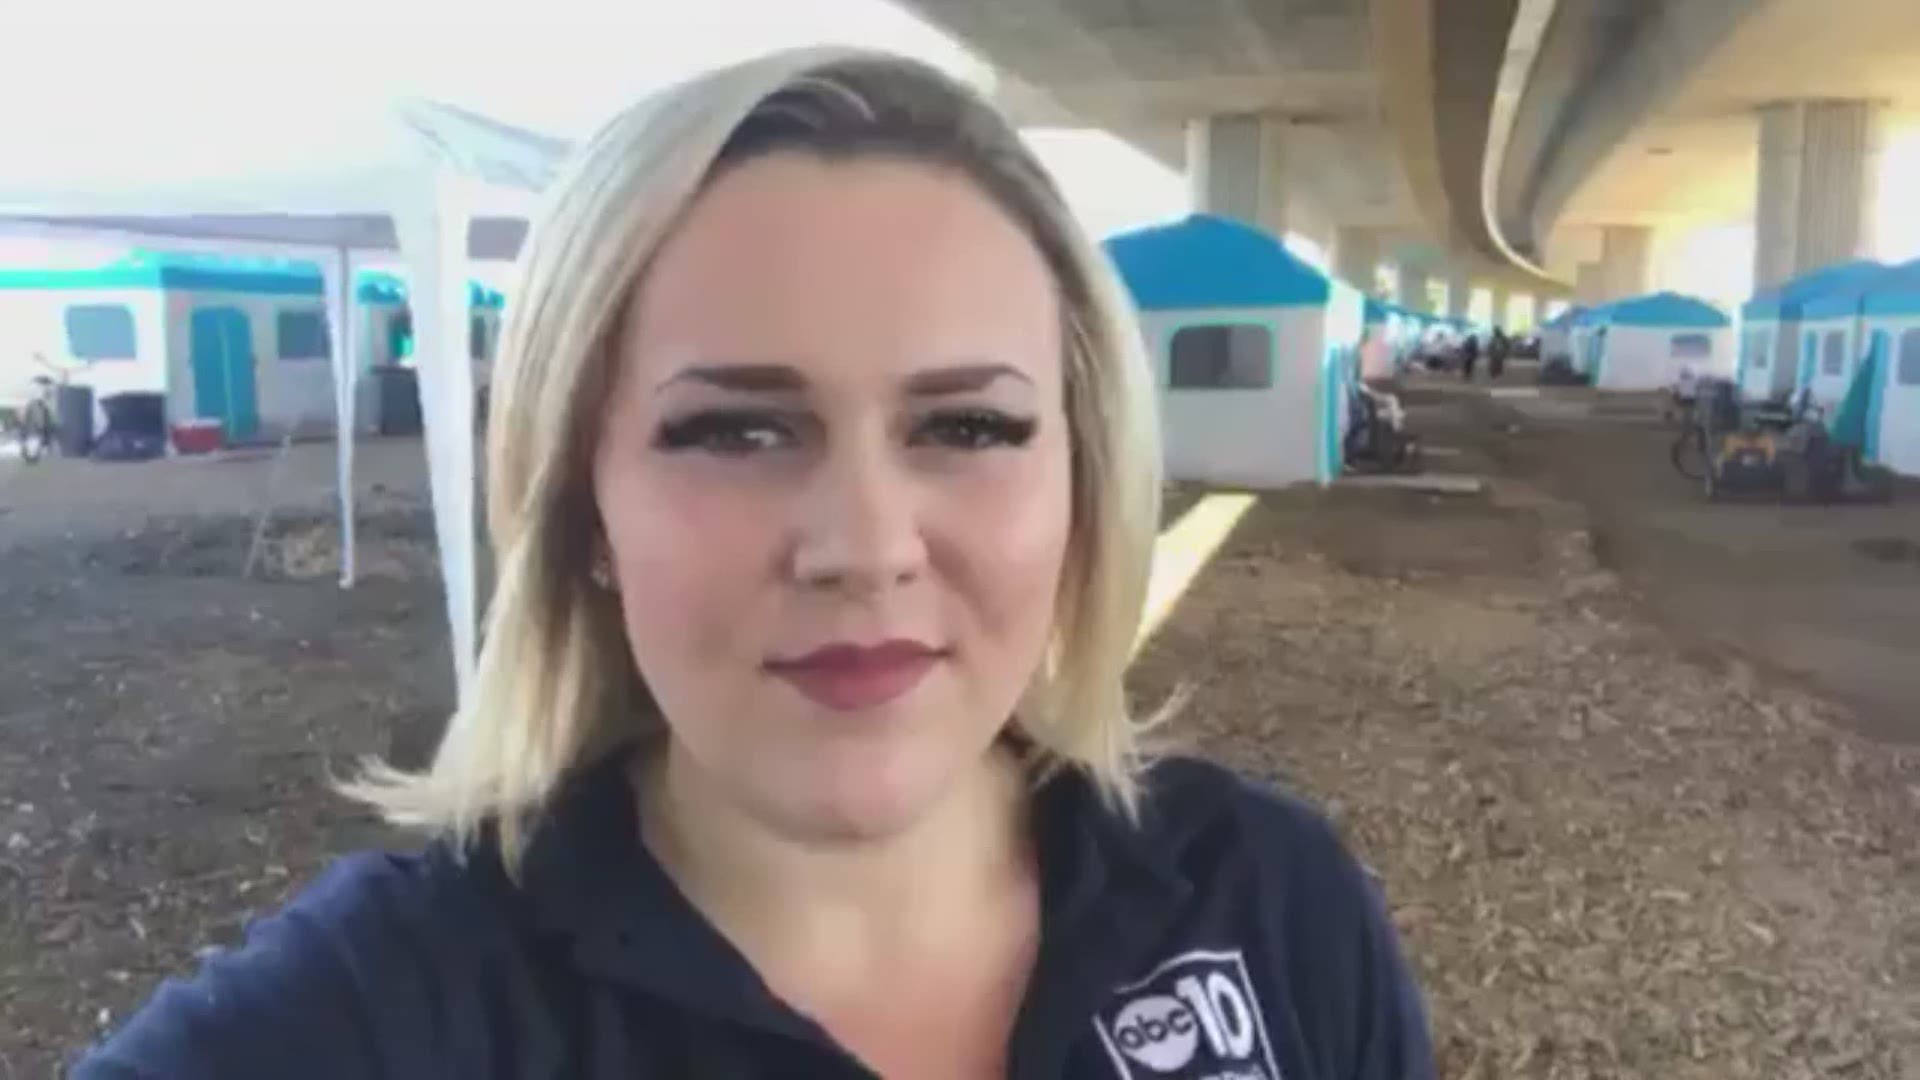 Lena Howland shared this Facebook live with an update to the Modesto Outdoor Emergency shelter system under the 9th St. Bridge in Modesto. More than one month after the tent shelter system opened, city officials say that the program is working and that any night they have about 350 - 400 people sleeping here. So far, they've been able to get 40 former residents into more permanent housing.